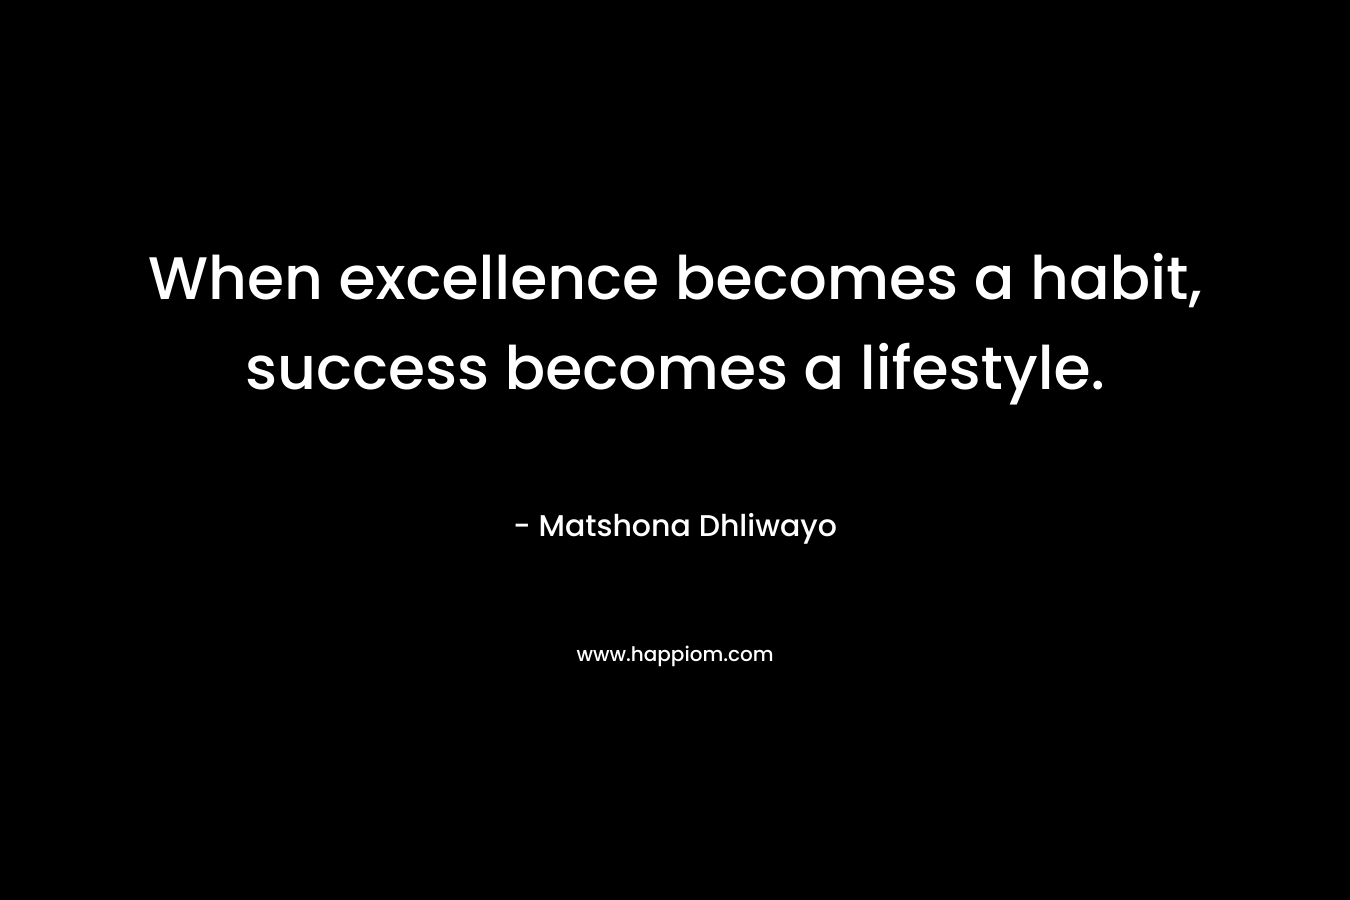 When excellence becomes a habit, success becomes a lifestyle.